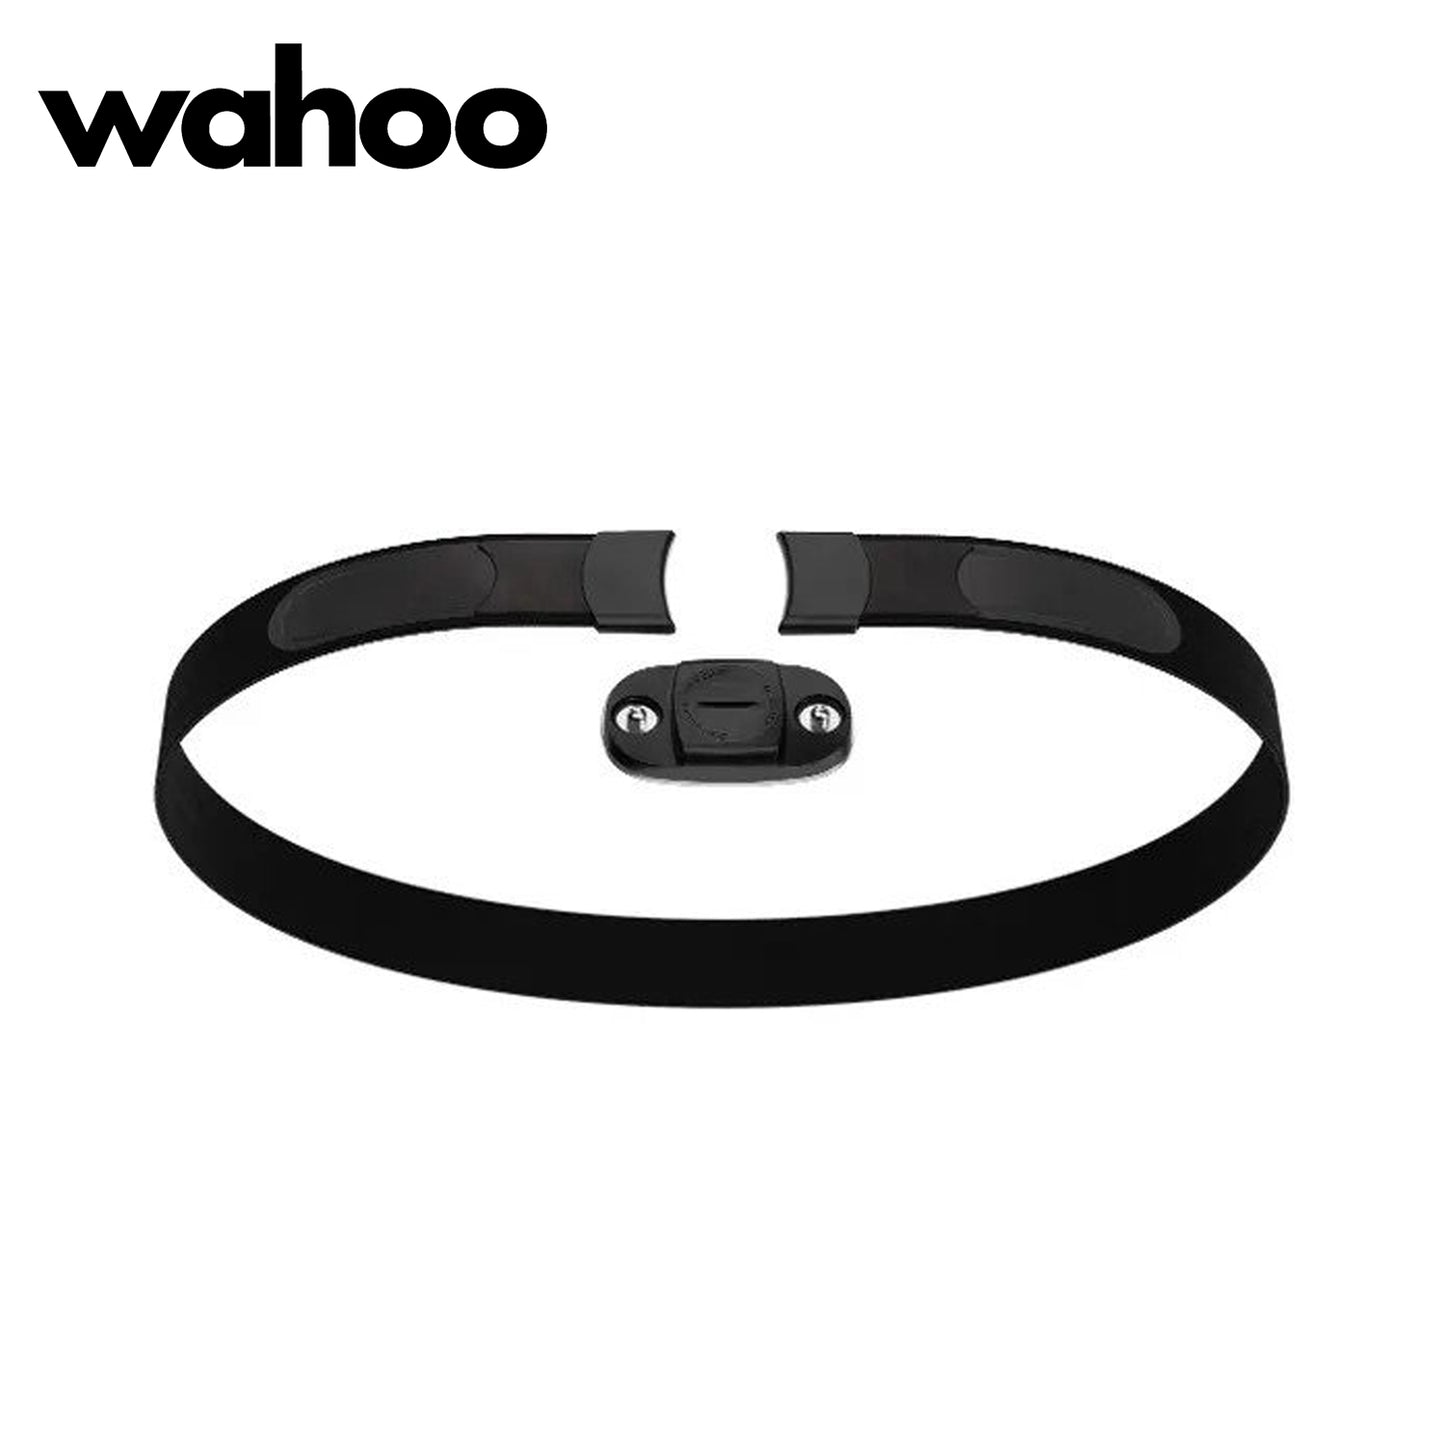 Wahoo TICKR Heart Rate Monitor w/ Chest Strap - White